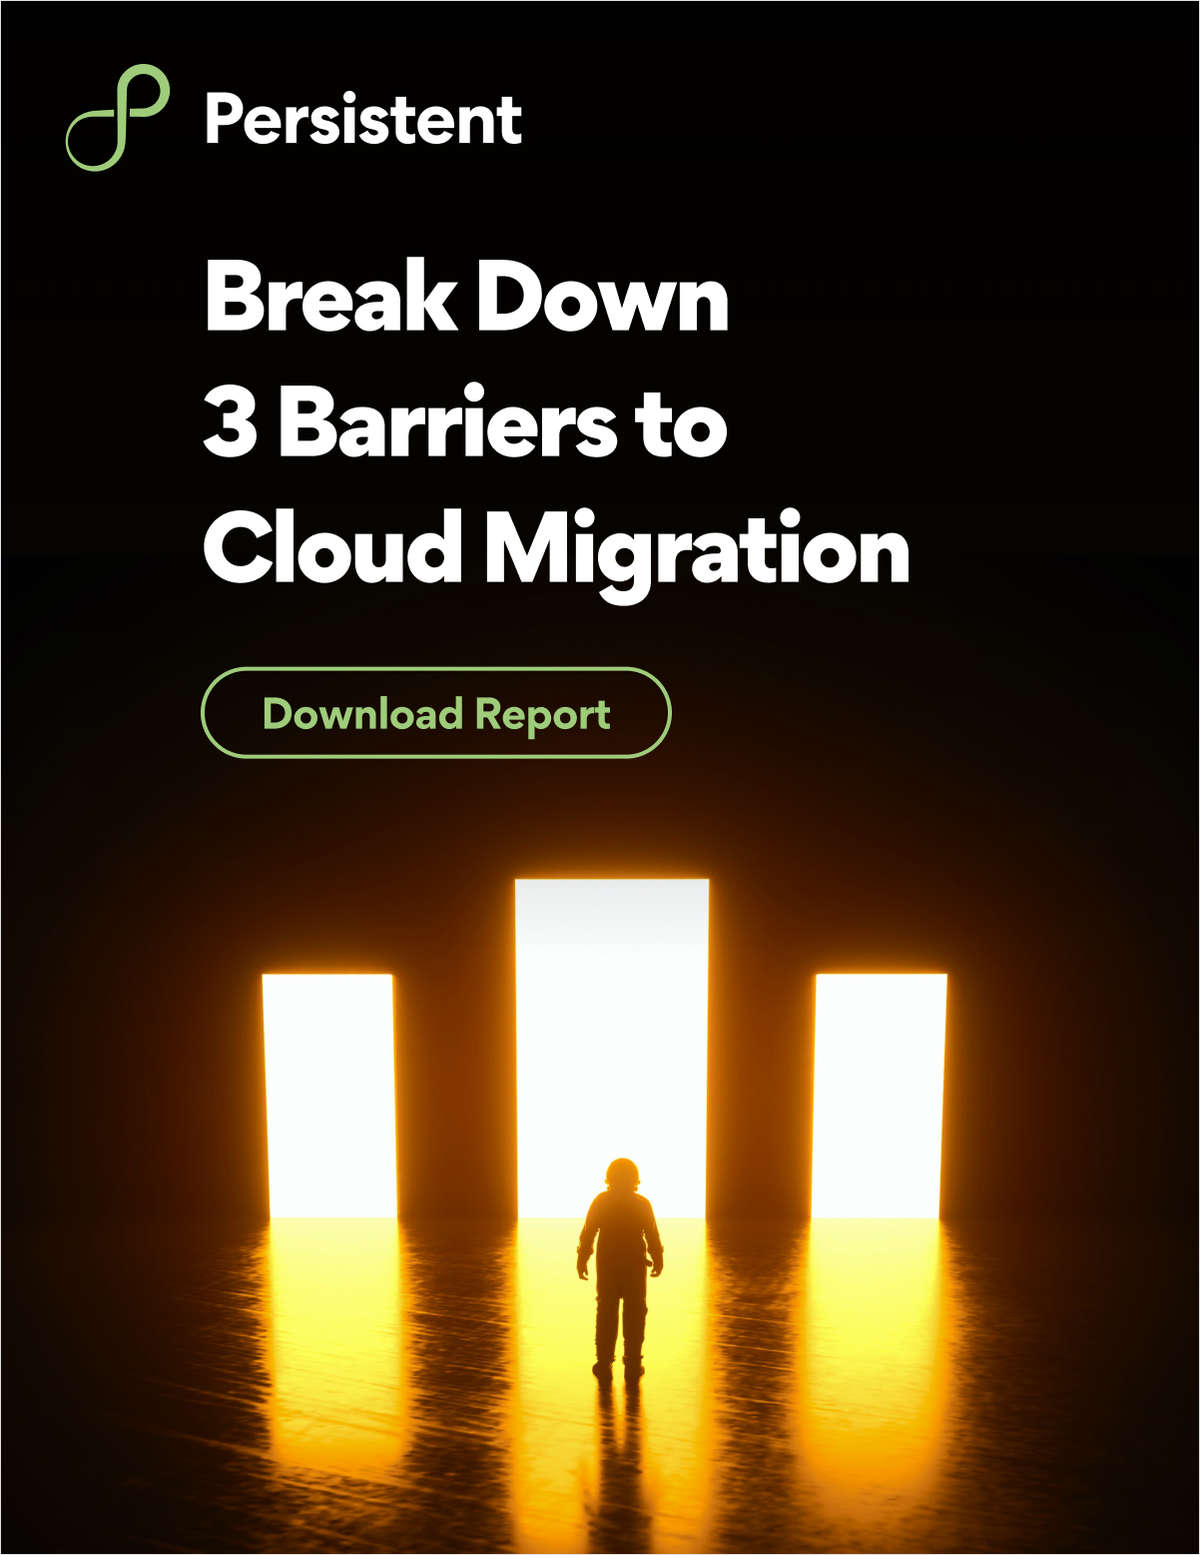 Understand 3 Barriers to Cloud Migration